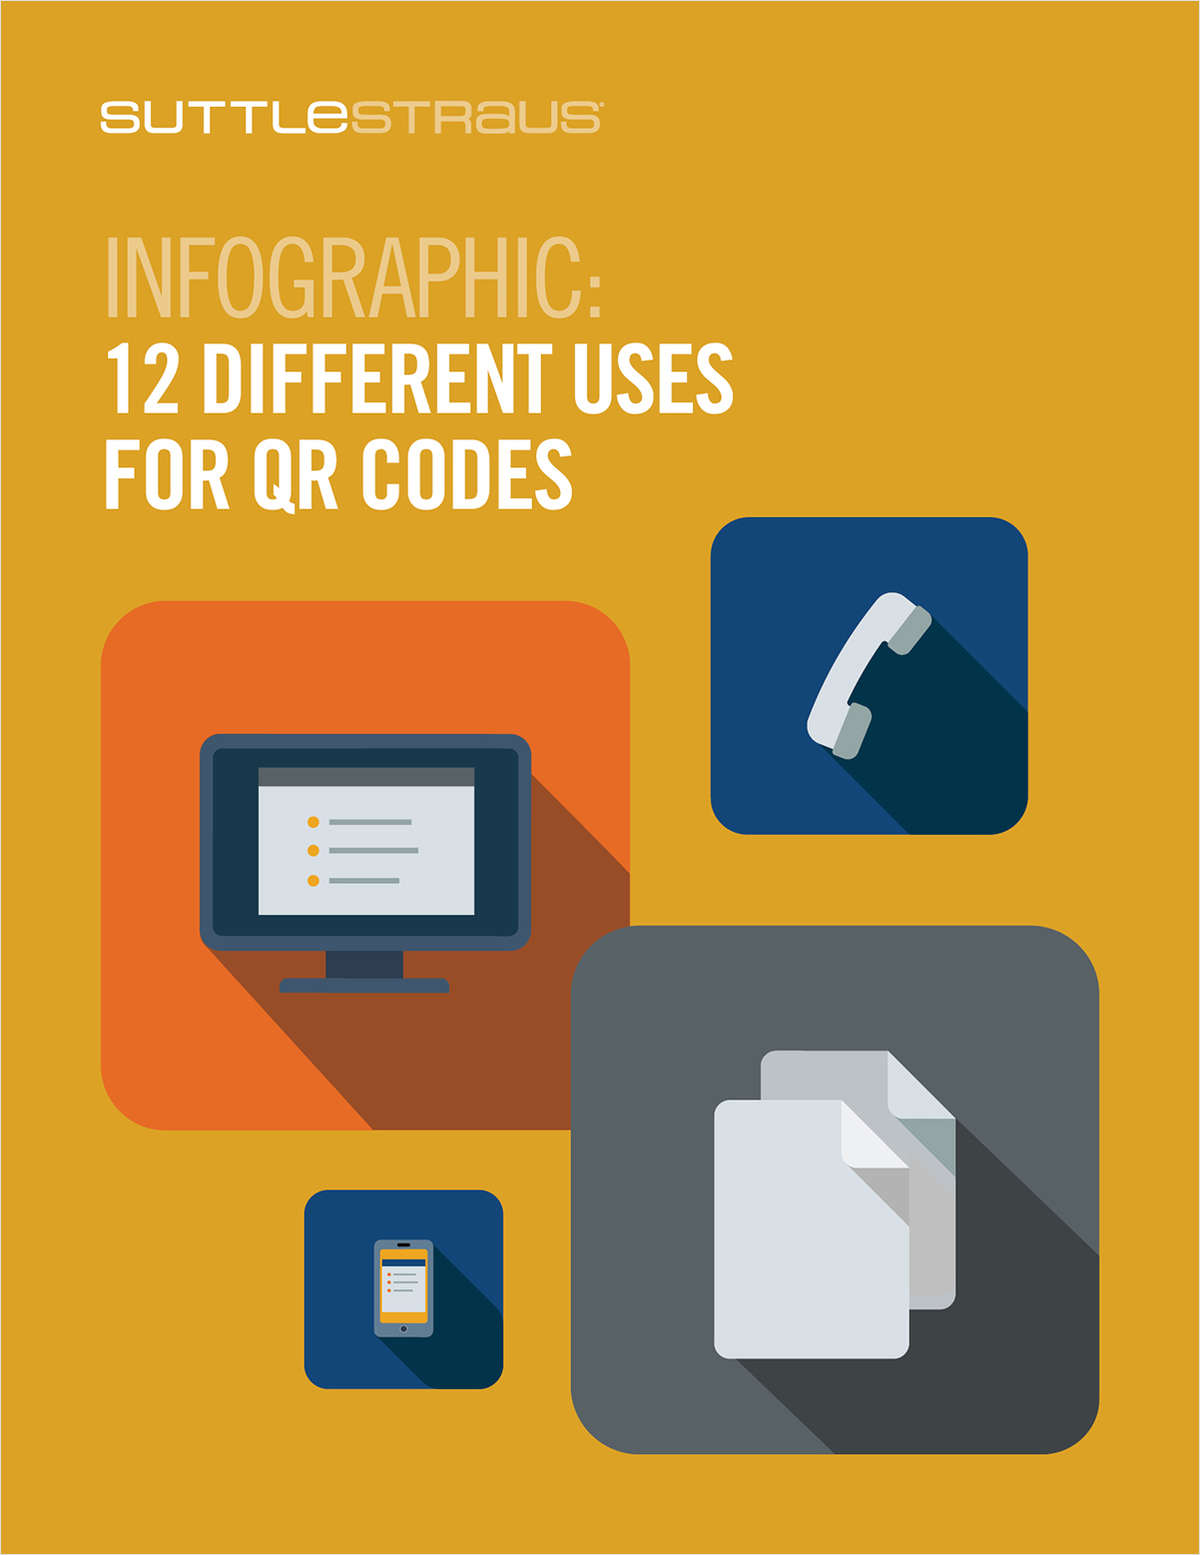 Infographic: 12 Different Uses for QR Codes